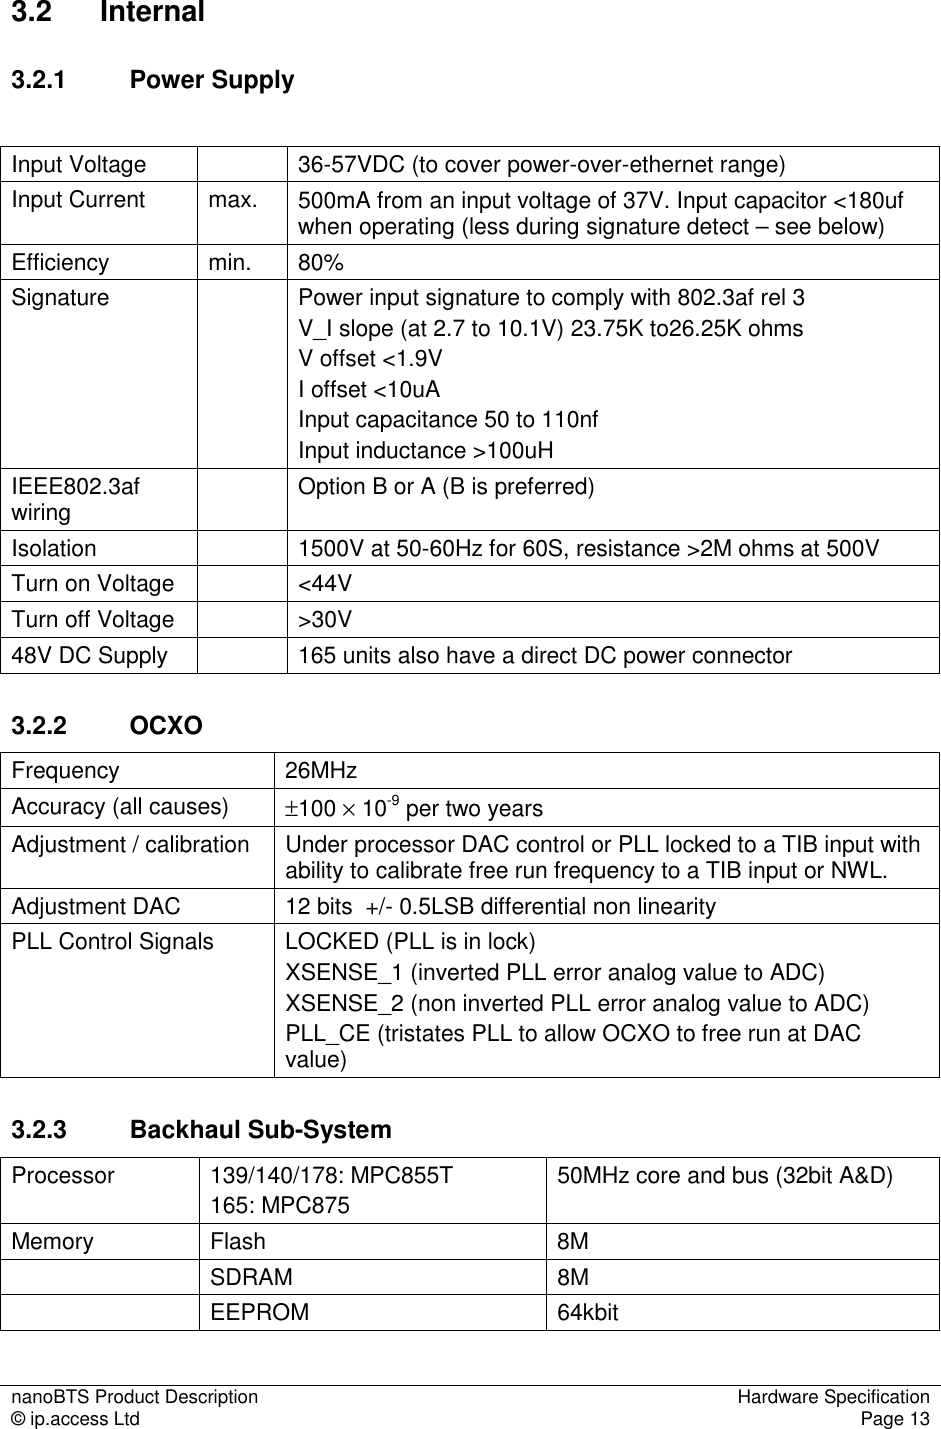 nanoBTS Product Description  Hardware Specification © ip.access Ltd  Page 13  3.2  Internal 3.2.1  Power Supply  Input Voltage    36-57VDC (to cover power-over-ethernet range) Input Current  max.  500mA from an input voltage of 37V. Input capacitor &lt;180uf when operating (less during signature detect – see below) Efficiency  min.  80% Signature    Power input signature to comply with 802.3af rel 3 V_I slope (at 2.7 to 10.1V) 23.75K to26.25K ohms V offset &lt;1.9V I offset &lt;10uA Input capacitance 50 to 110nf Input inductance &gt;100uH IEEE802.3af wiring    Option B or A (B is preferred) Isolation    1500V at 50-60Hz for 60S, resistance &gt;2M ohms at 500V Turn on Voltage    &lt;44V Turn off Voltage    &gt;30V 48V DC Supply    165 units also have a direct DC power connector 3.2.2  OCXO Frequency  26MHz Accuracy (all causes)  ±100 × 10-9 per two years Adjustment / calibration  Under processor DAC control or PLL locked to a TIB input with ability to calibrate free run frequency to a TIB input or NWL. Adjustment DAC  12 bits  +/- 0.5LSB differential non linearity PLL Control Signals  LOCKED (PLL is in lock) XSENSE_1 (inverted PLL error analog value to ADC) XSENSE_2 (non inverted PLL error analog value to ADC) PLL_CE (tristates PLL to allow OCXO to free run at DAC value) 3.2.3  Backhaul Sub-System Processor  139/140/178: MPC855T 165: MPC875 50MHz core and bus (32bit A&amp;D) Memory  Flash  8M   SDRAM  8M   EEPROM  64kbit 